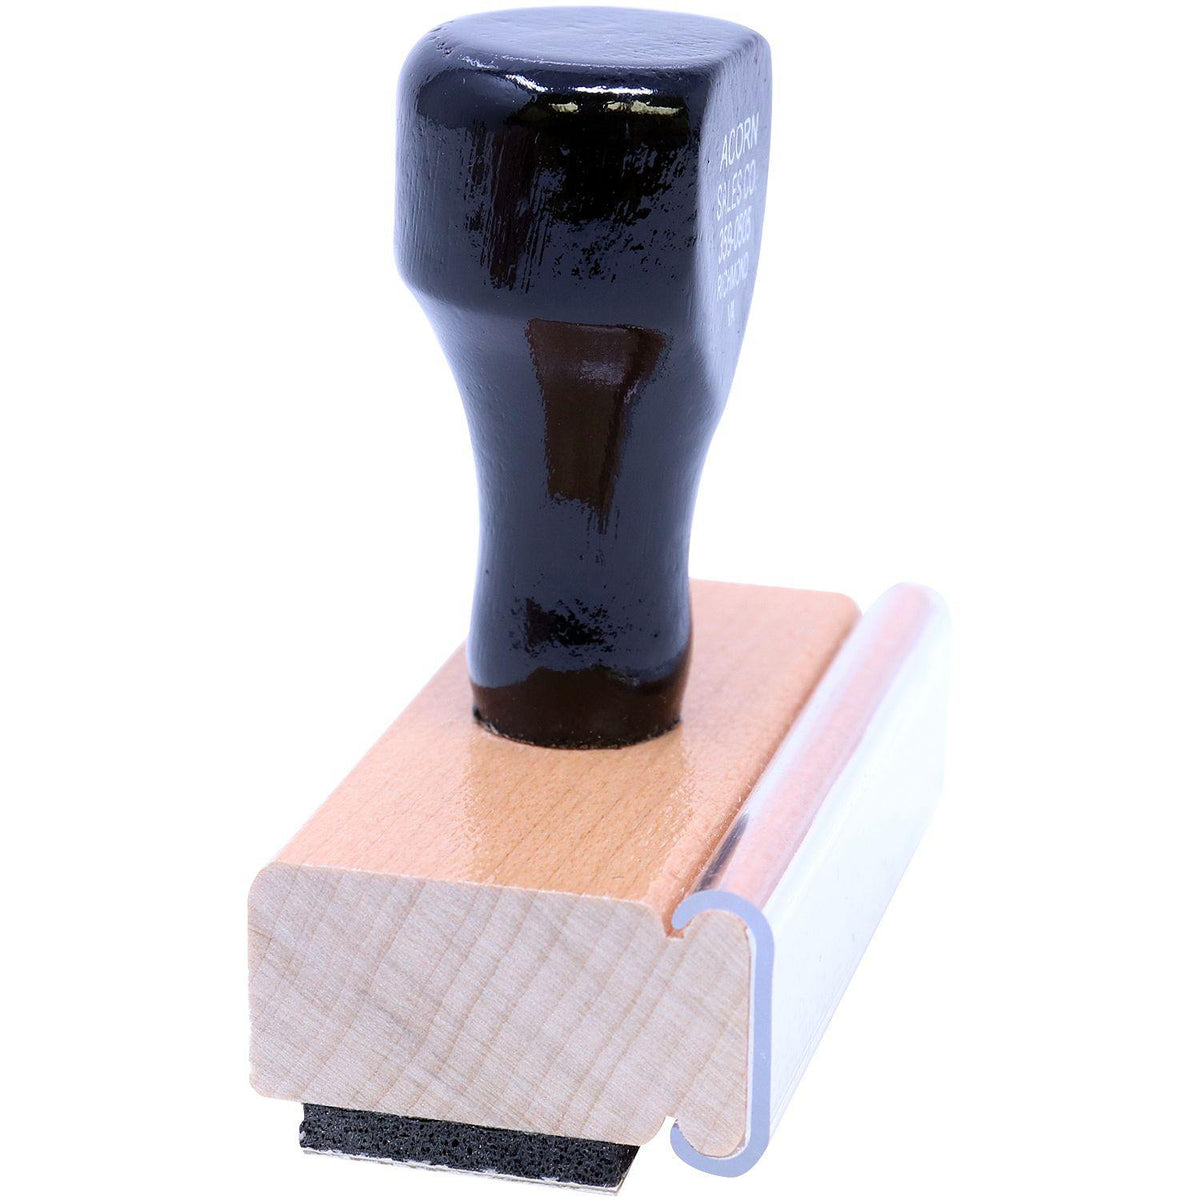 Side View of Large Narrow Font Second Notice Rubber Stamp at an Angle